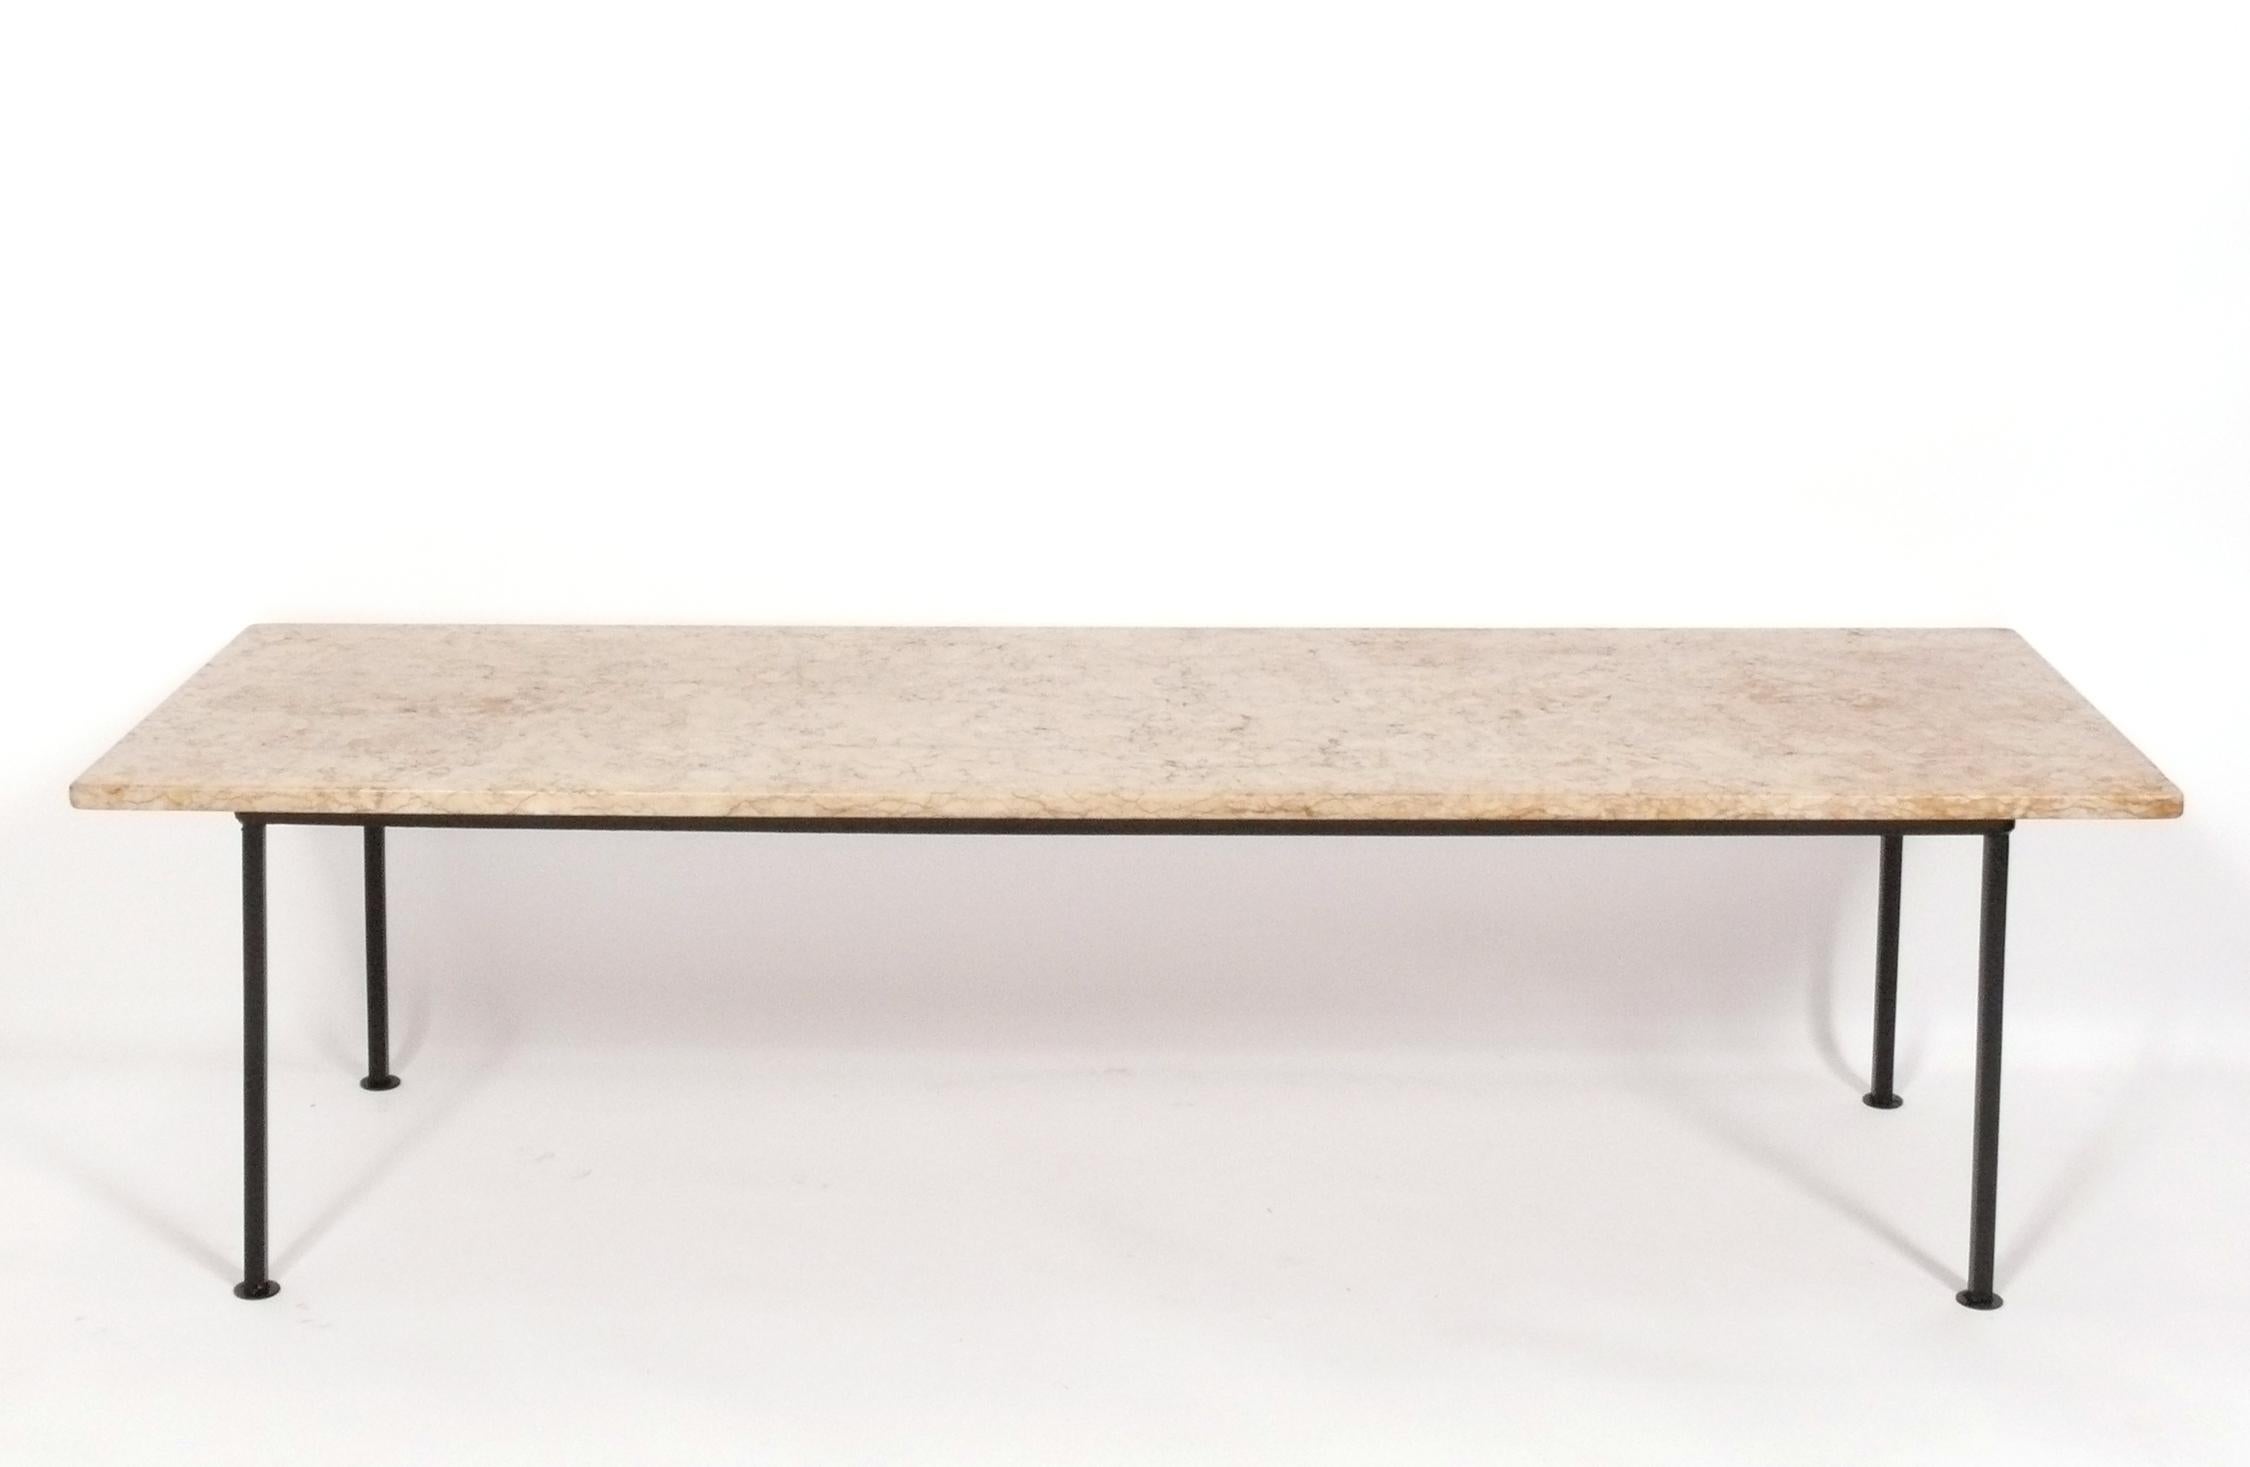 Clean line midcentury marble and iron coffee table, attributed to Frederick Weinberg, American, circa 1950s.